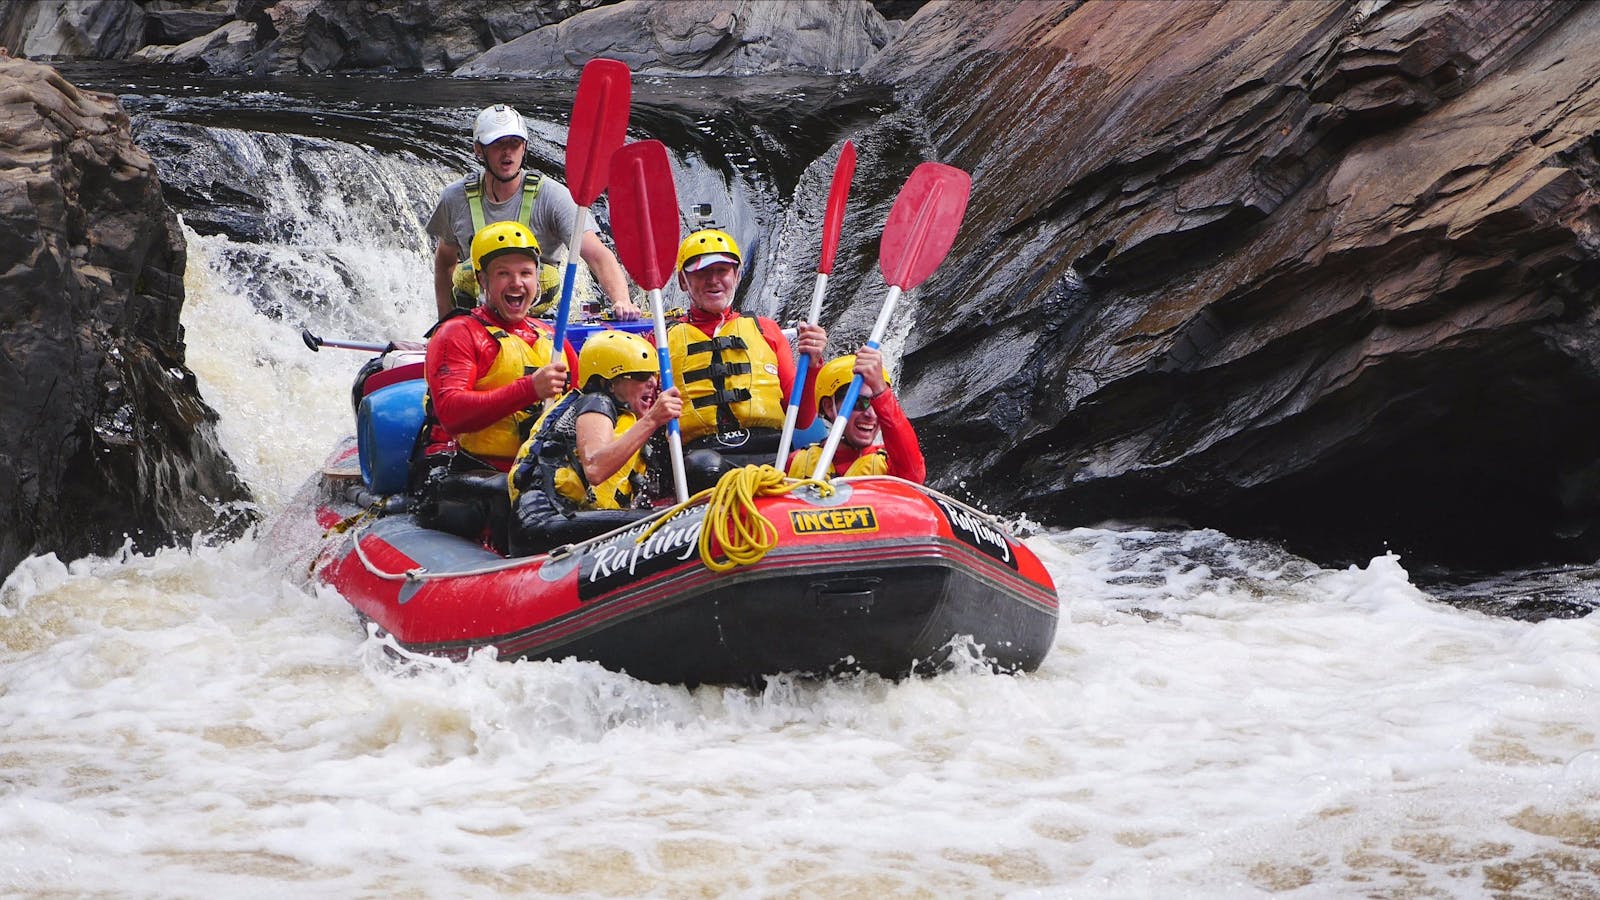 White water rafting down the Corkscrew rapid